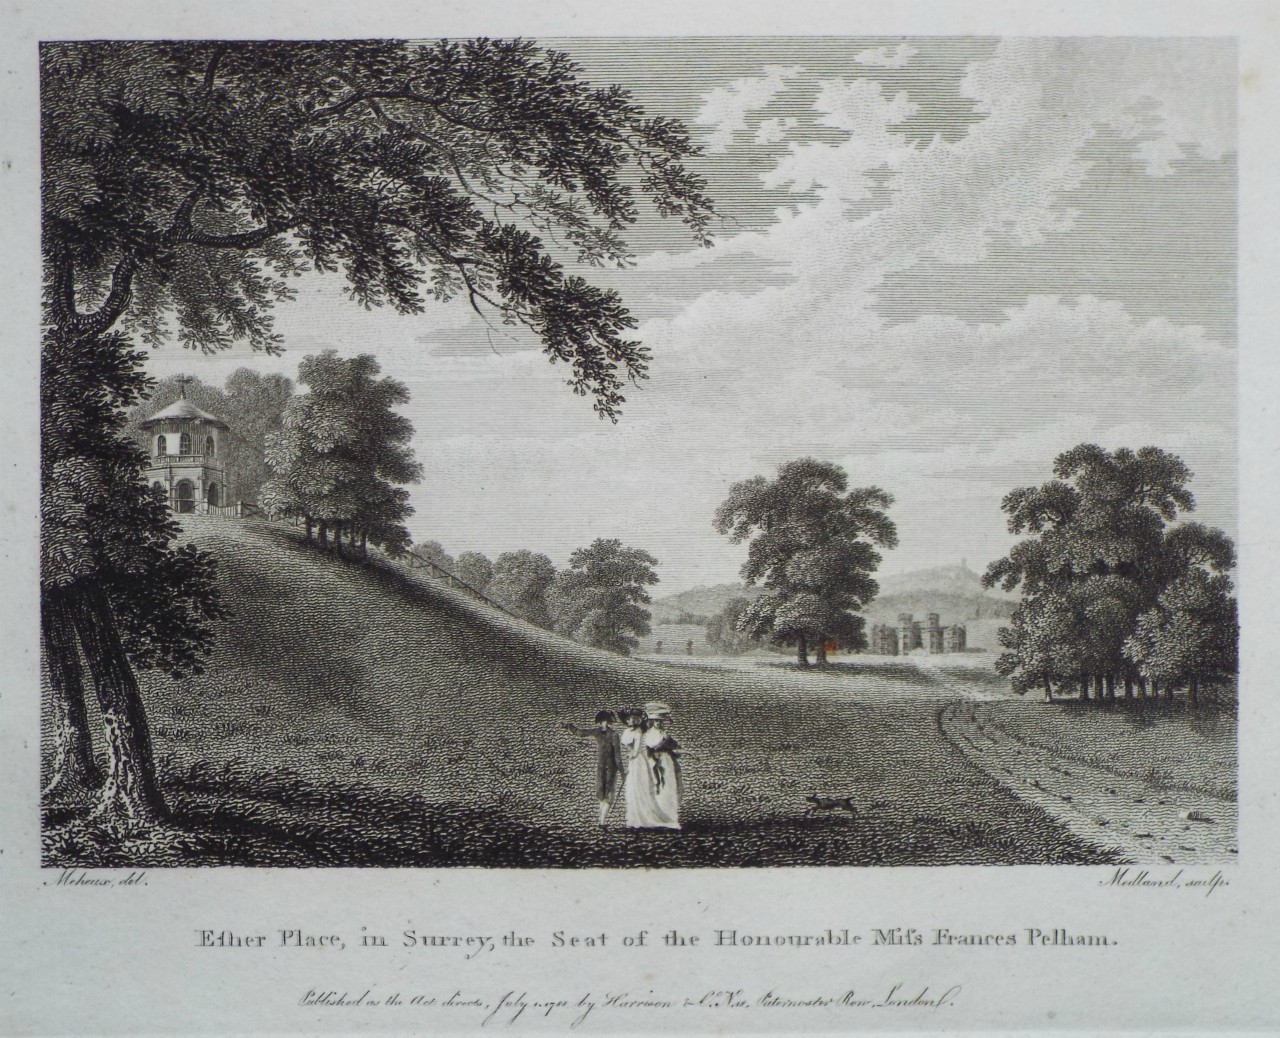 Print - Esher Place, in Surrey, the Seat of the Honourable Miss Frances Pelham. - 